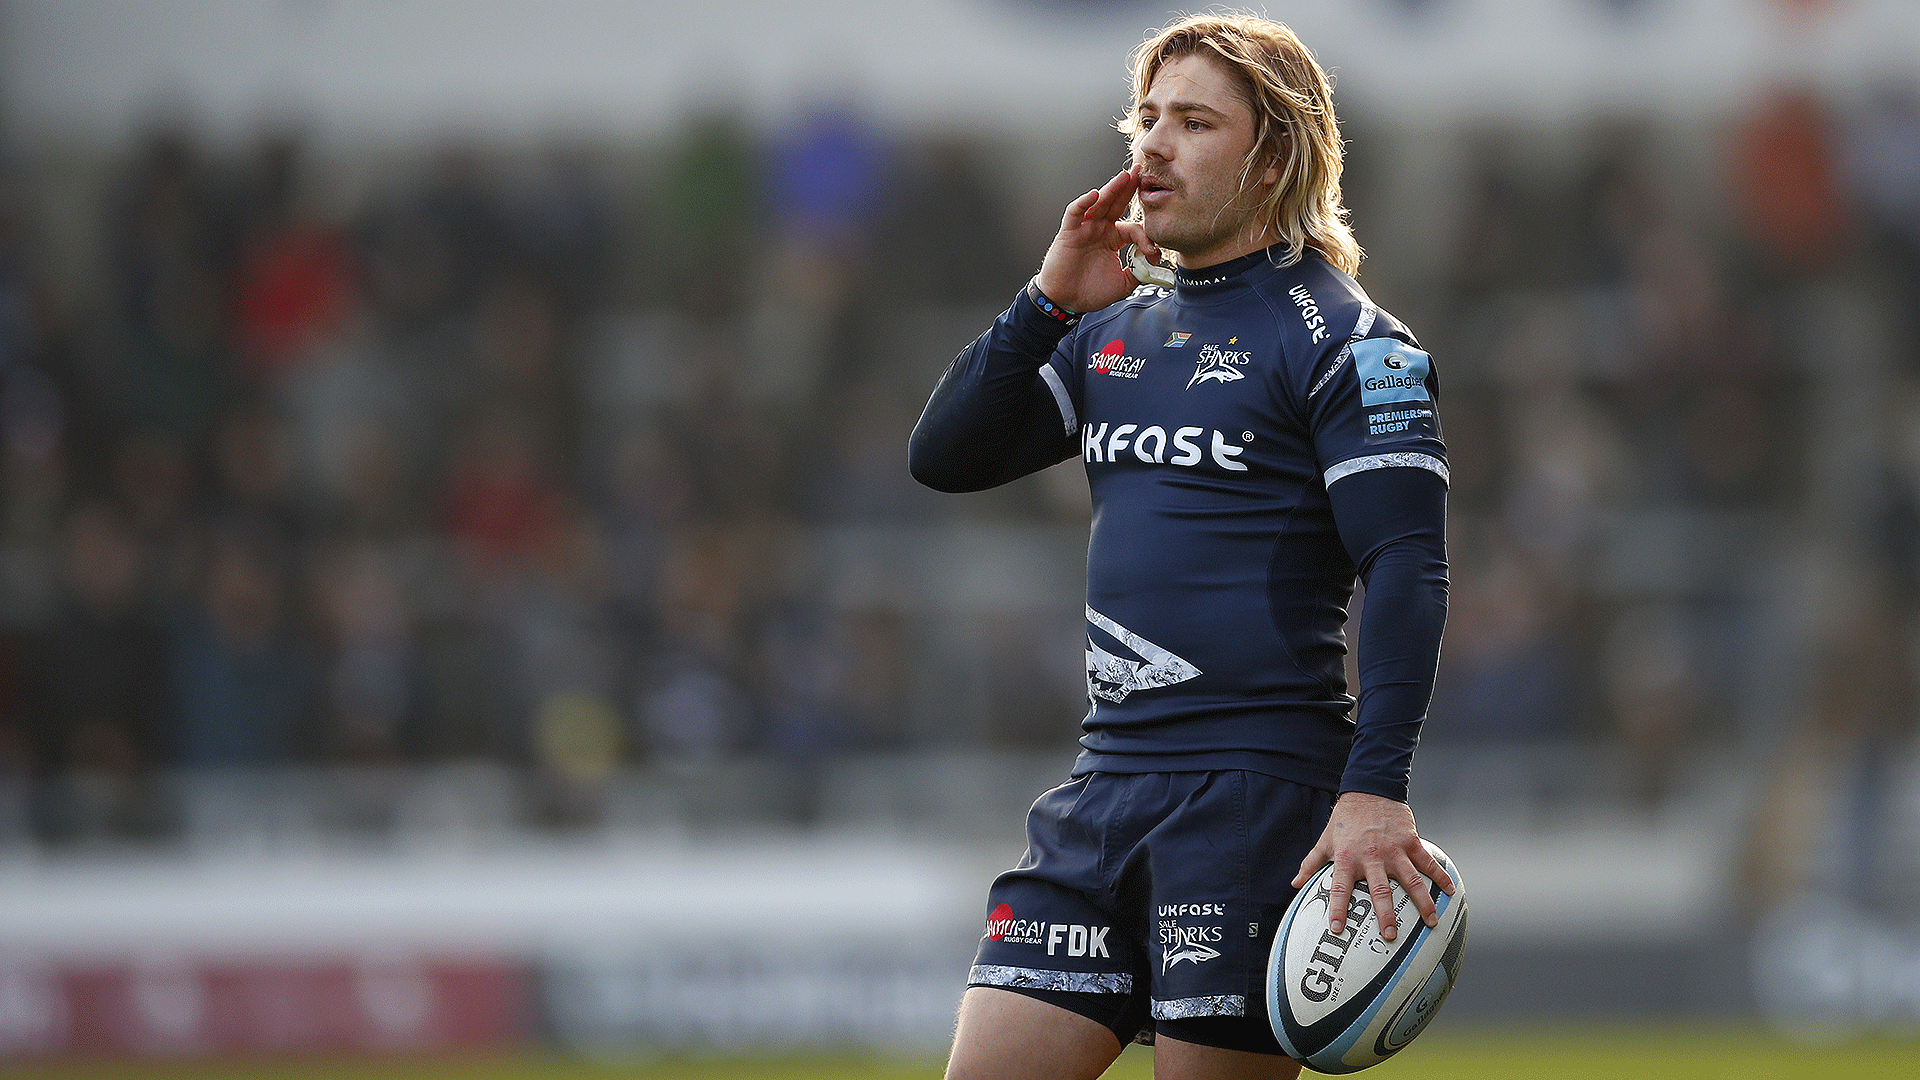 Sale Sharks wing Luke James during the Gallagher Premiership Rugby